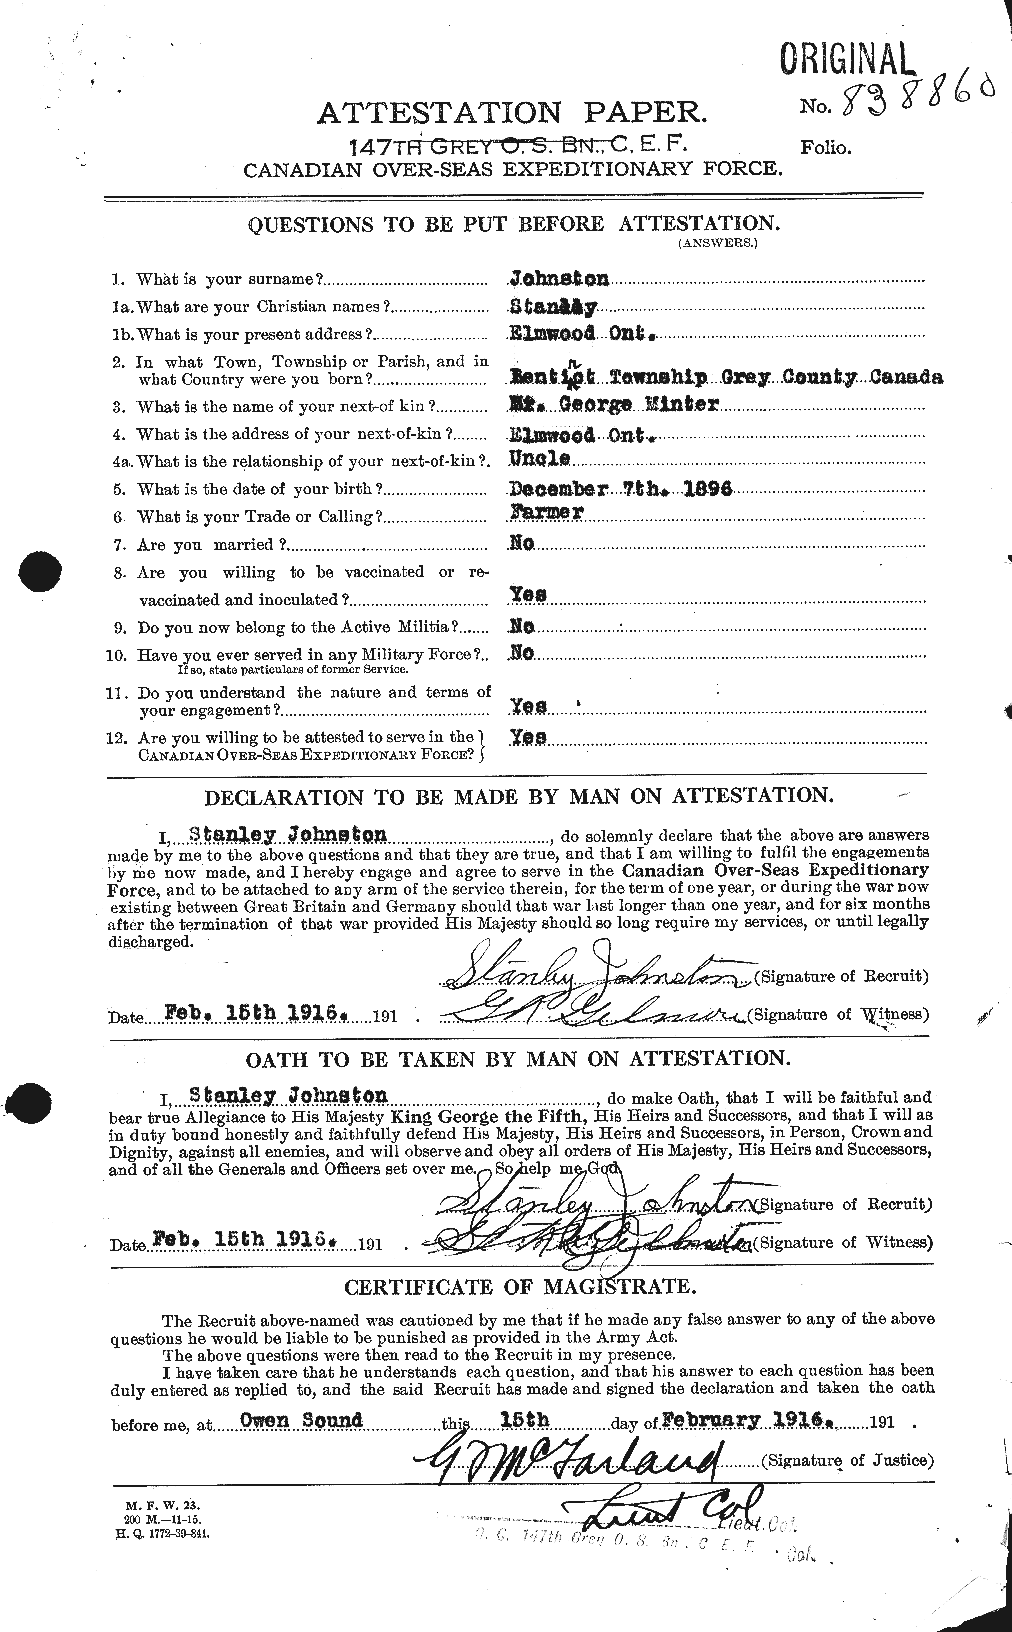 Personnel Records of the First World War - CEF 427099a